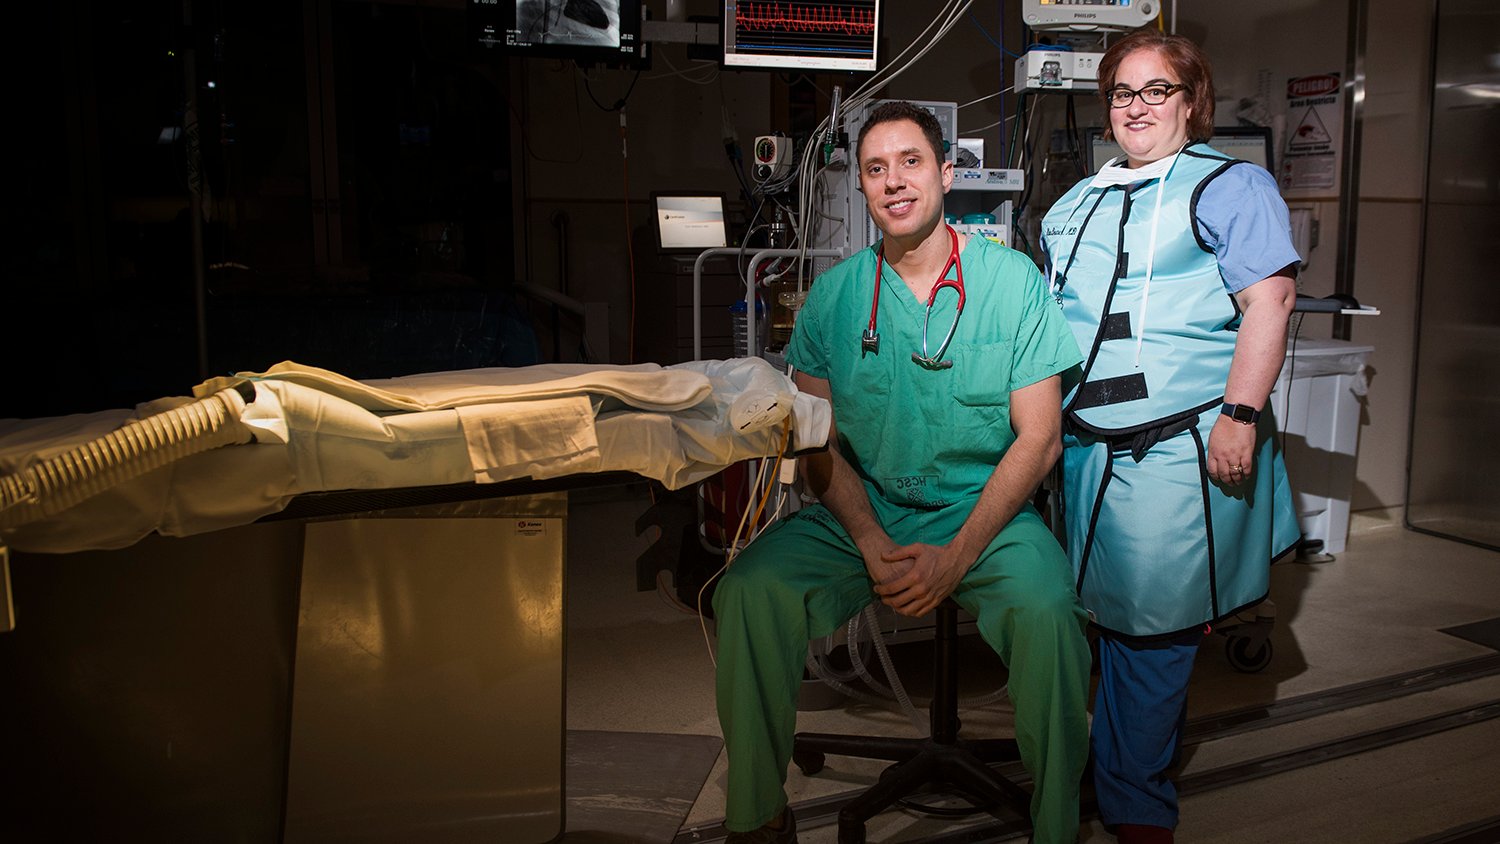  Nina Deutsch, MD, Director of Cardiac Anesthesiology, and Jonathan Swink, Certified Anesthesiologist Assistant